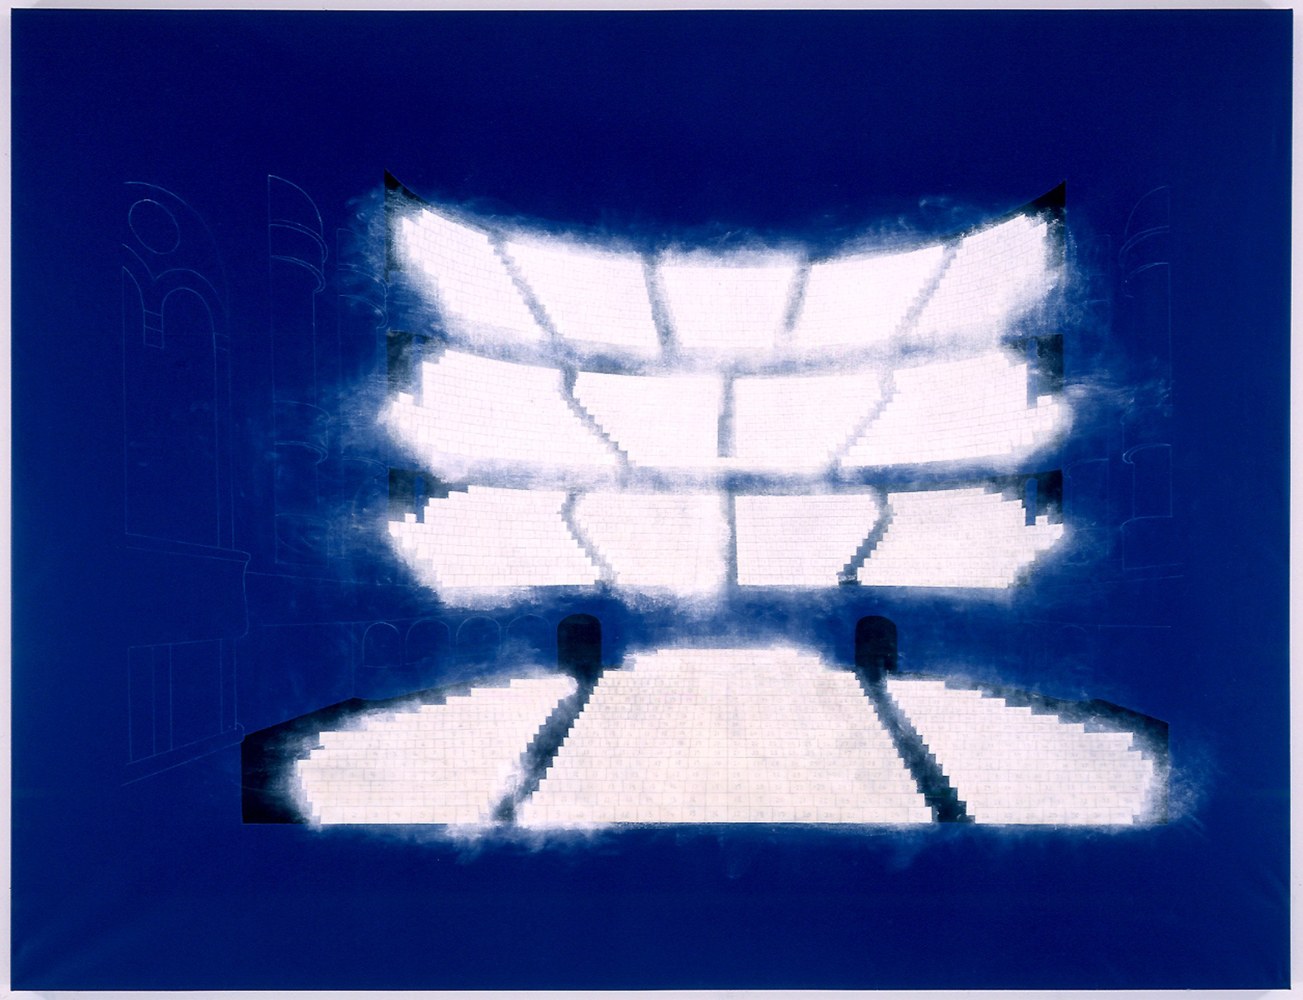 Guillermo Kuitca
Untitled, 1995
chalk and acrylic on canvas
71 x 92 inches (180,3 x 233,7 cm)
SW 95189
Collection of The Art Institute of Chicago